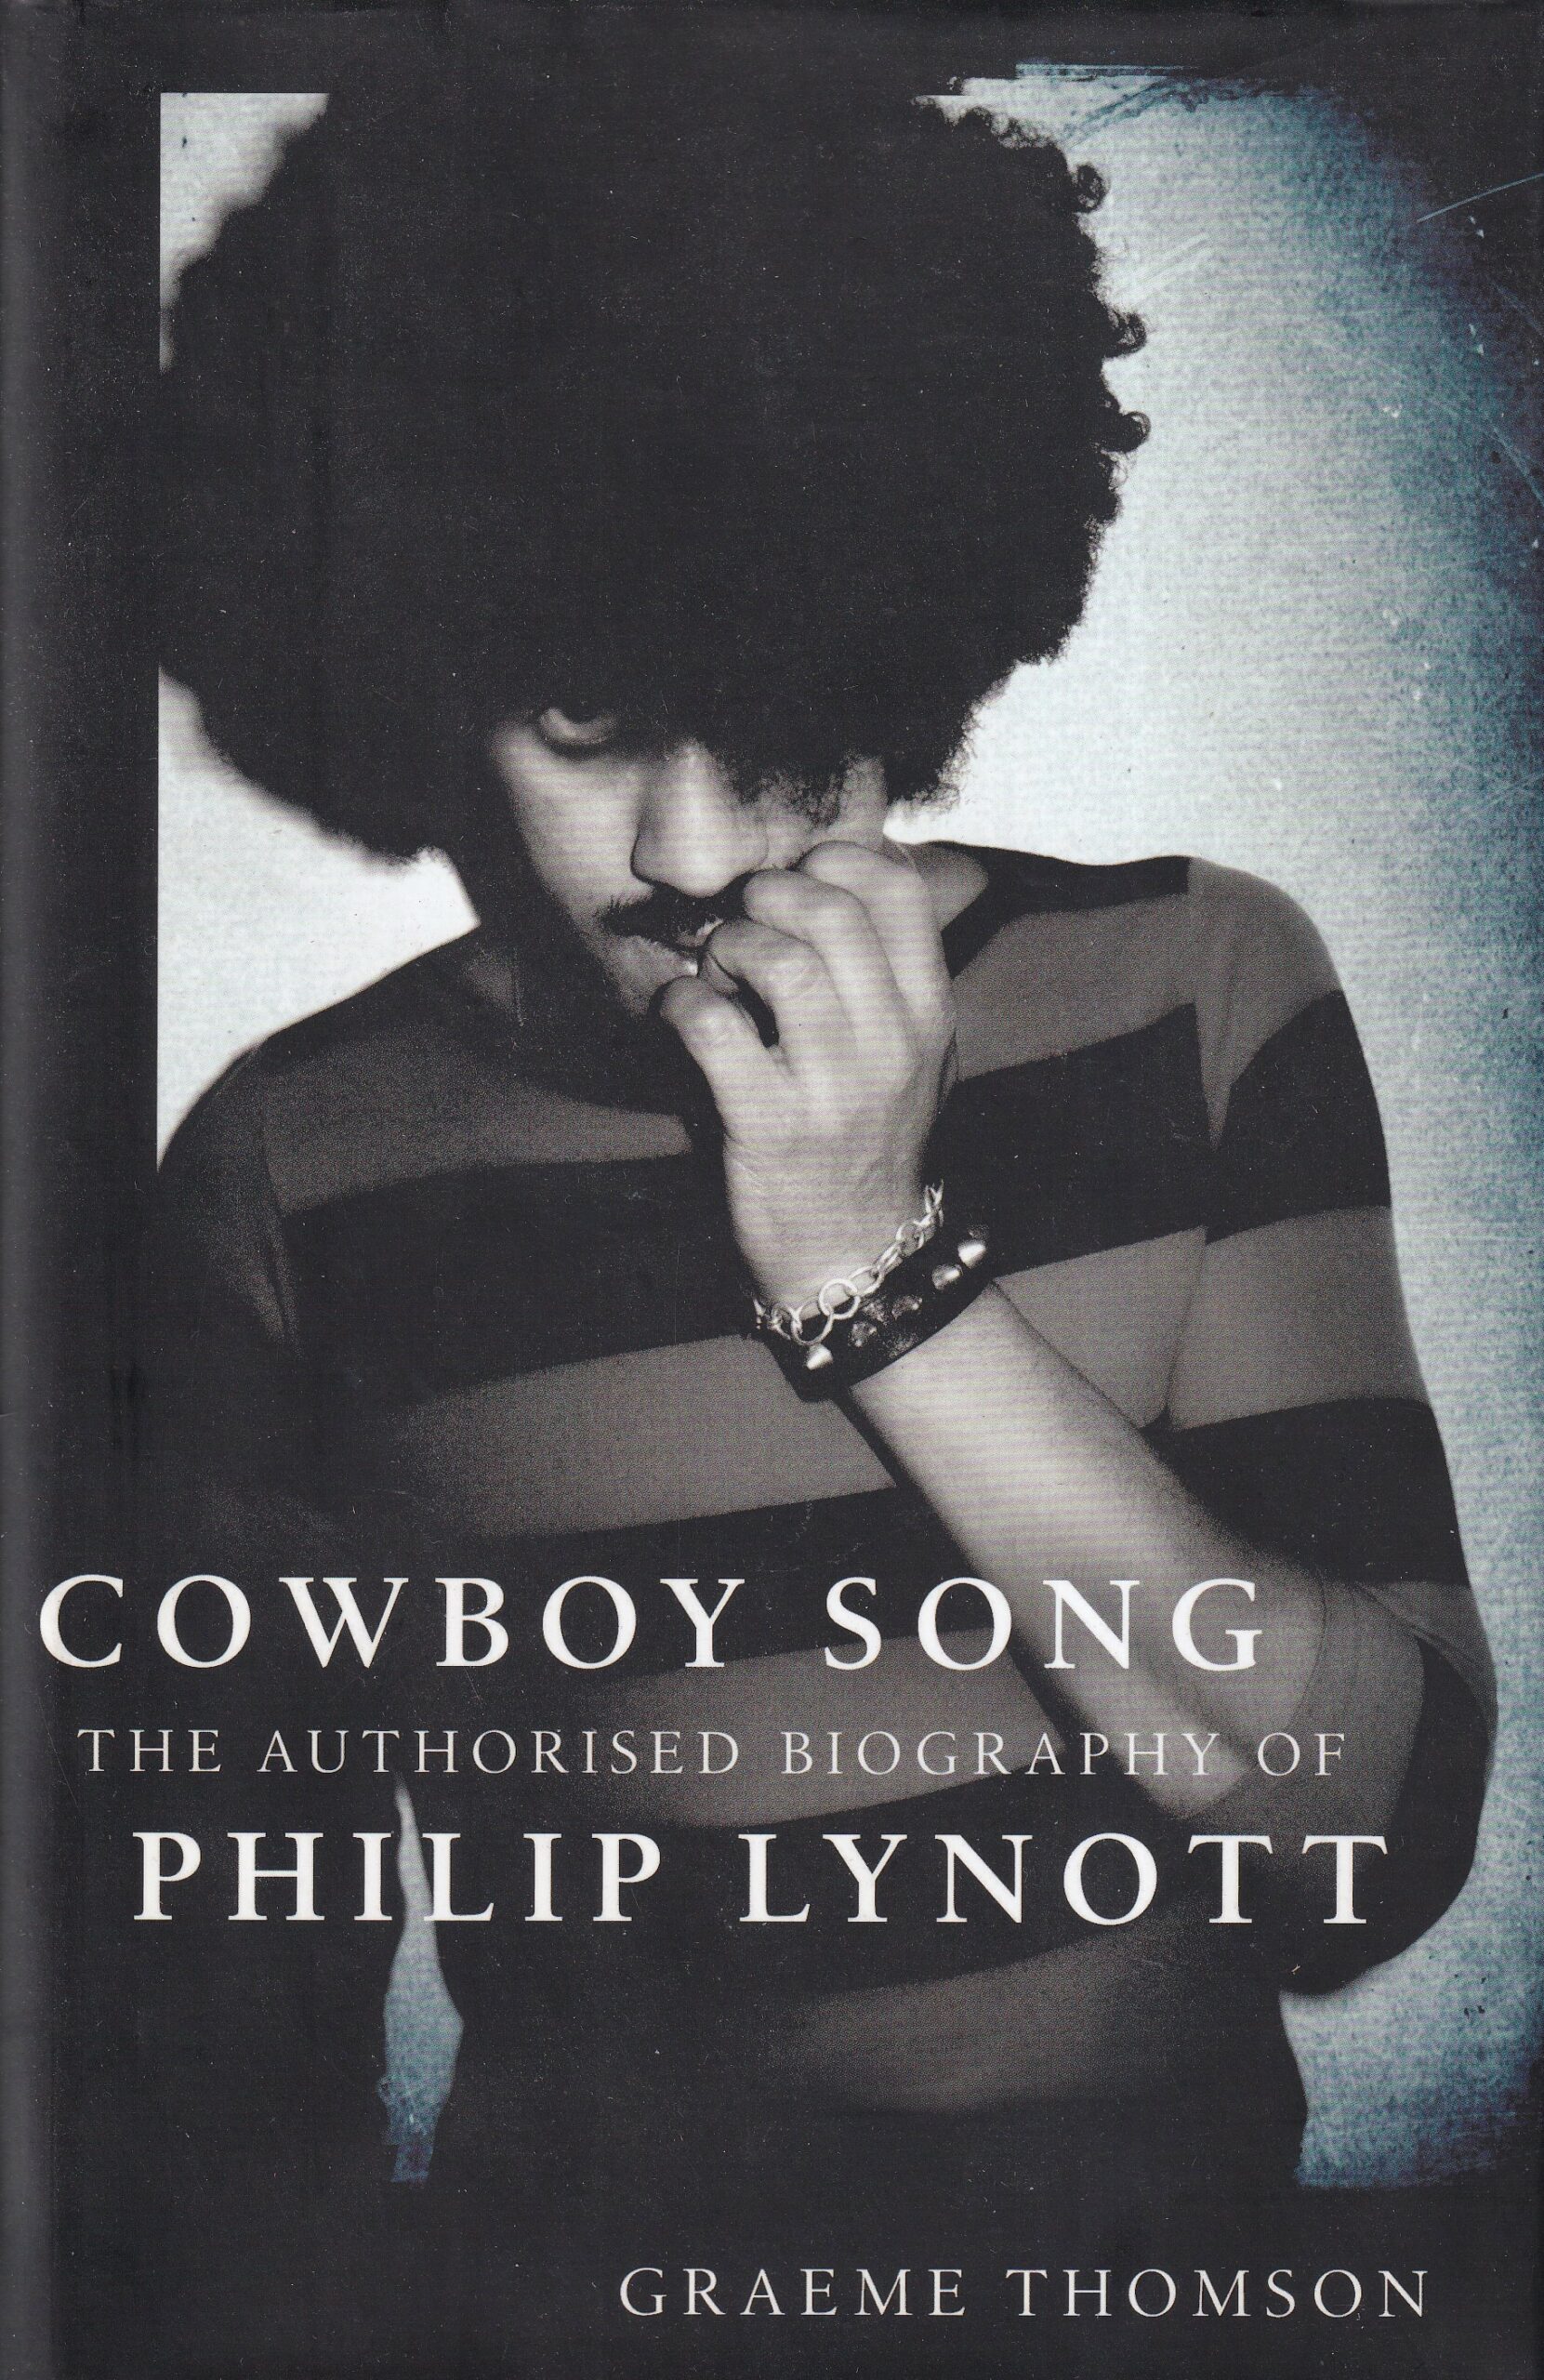 Cowboy Song: The Authorised Biography of Philip Lynott | Graeme Thomson | Charlie Byrne's